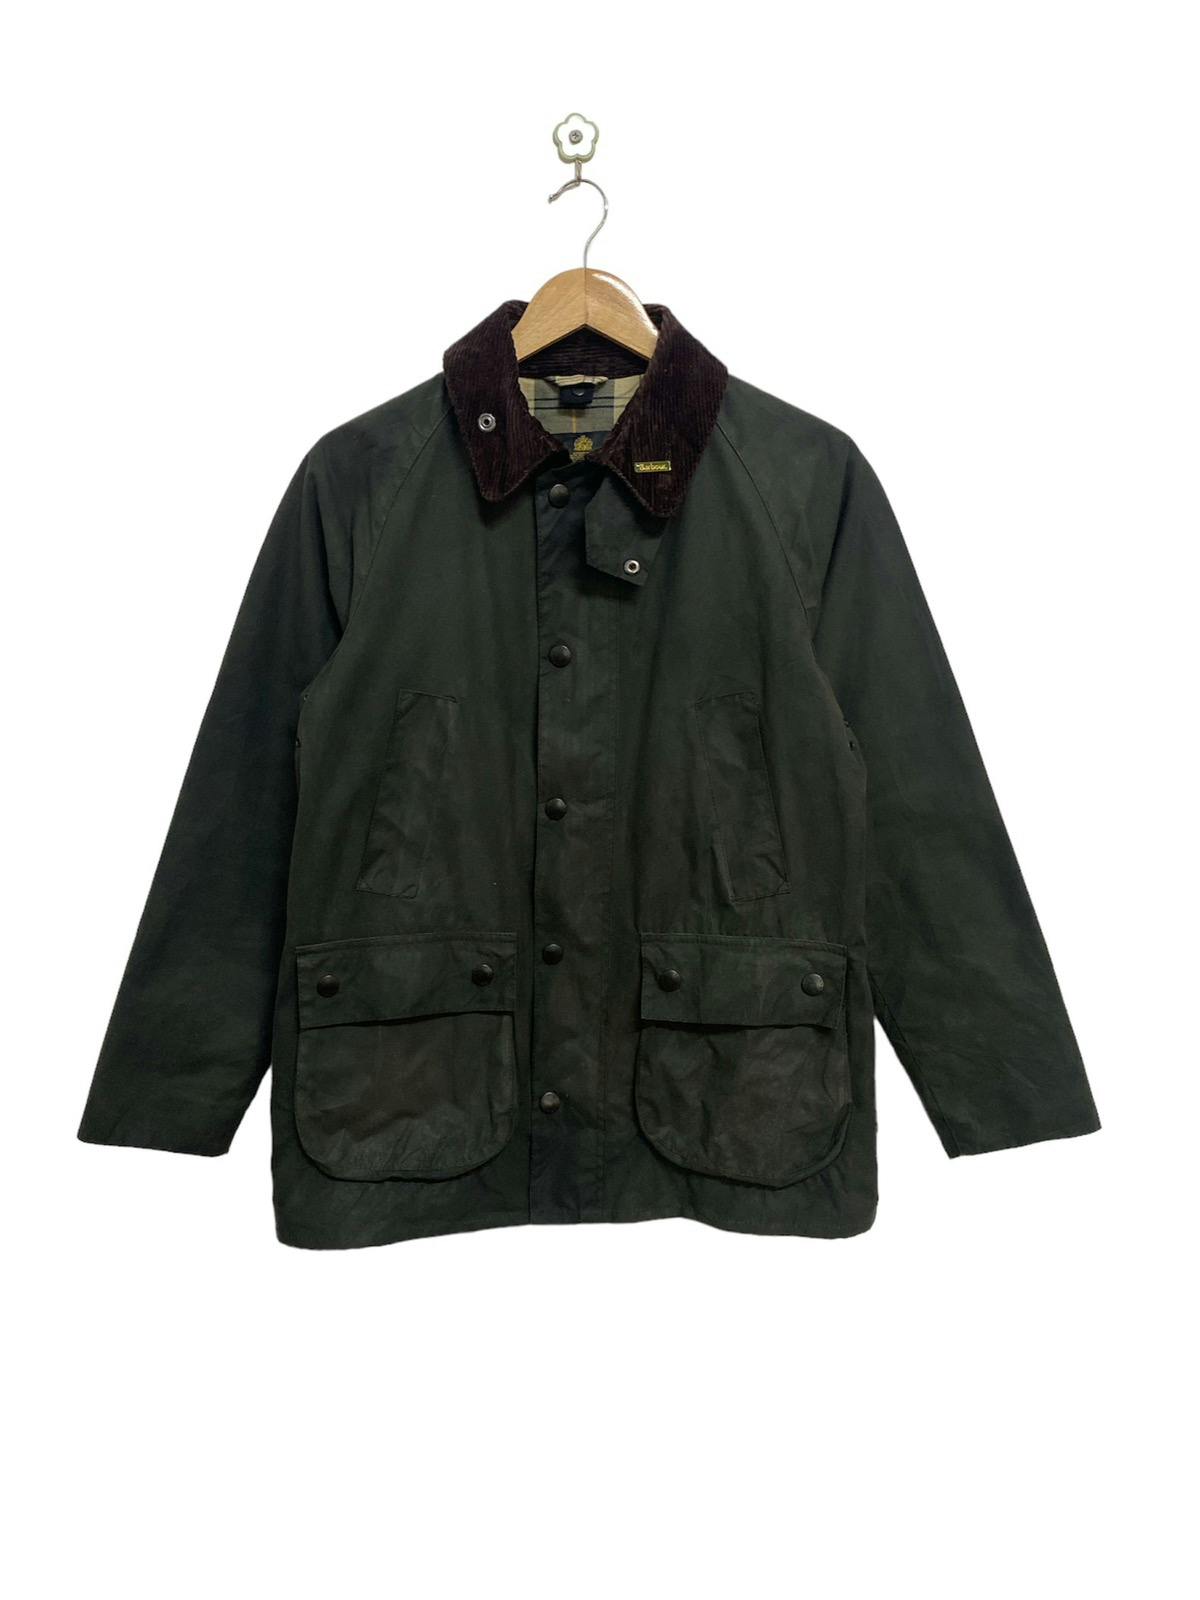 Barbour Classic Bedale AW19 Wax Jacket Made in England - 2